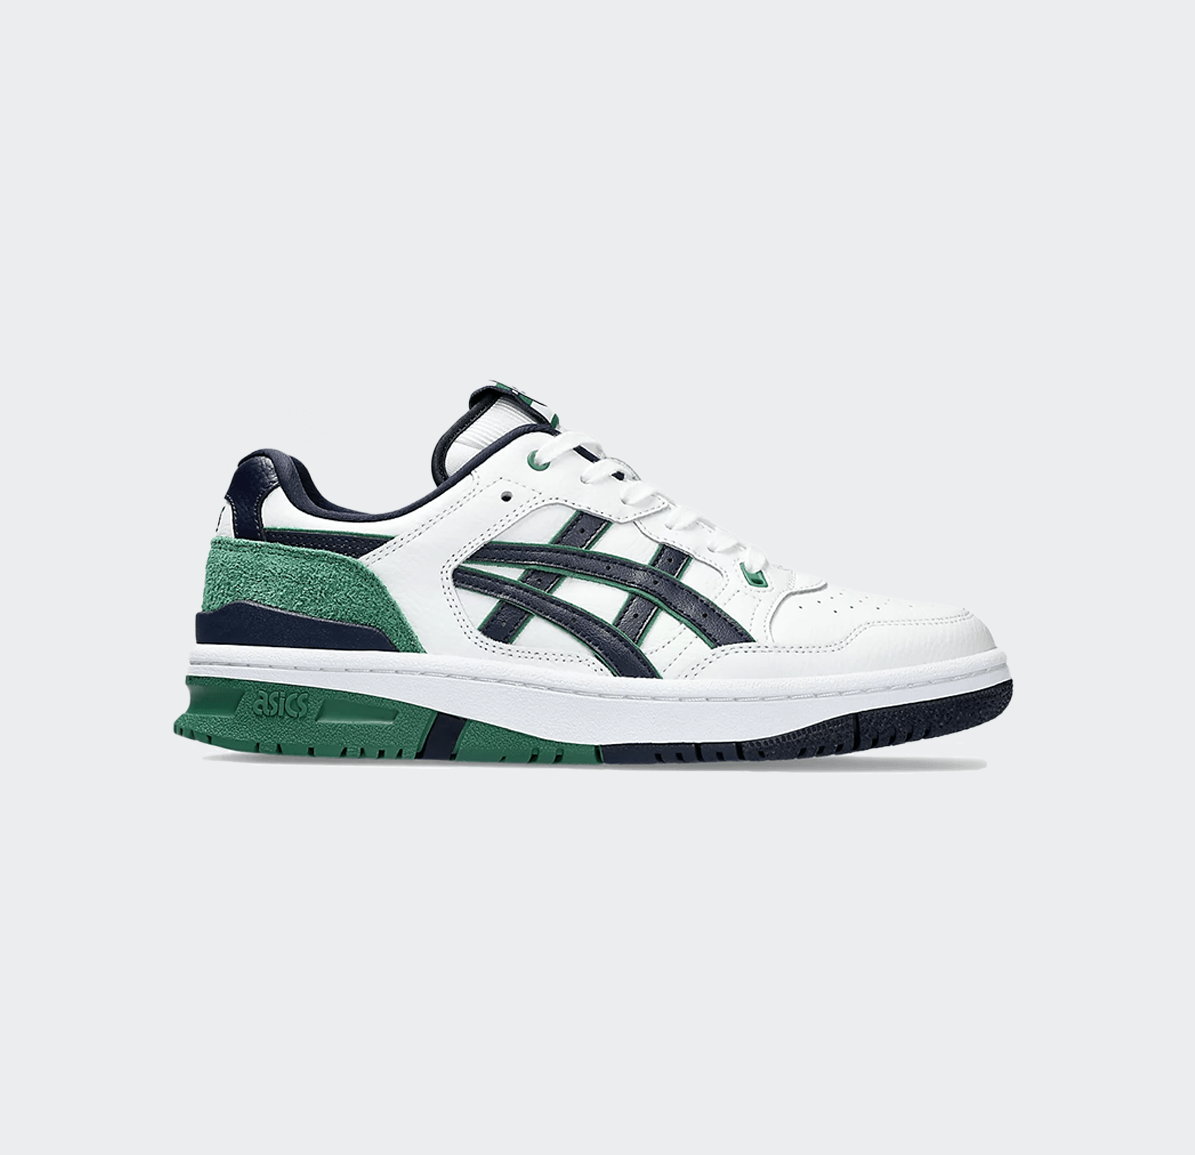 Asics SportStyle EX89 - White/Midnight - Asics SportStyle - State Of Play